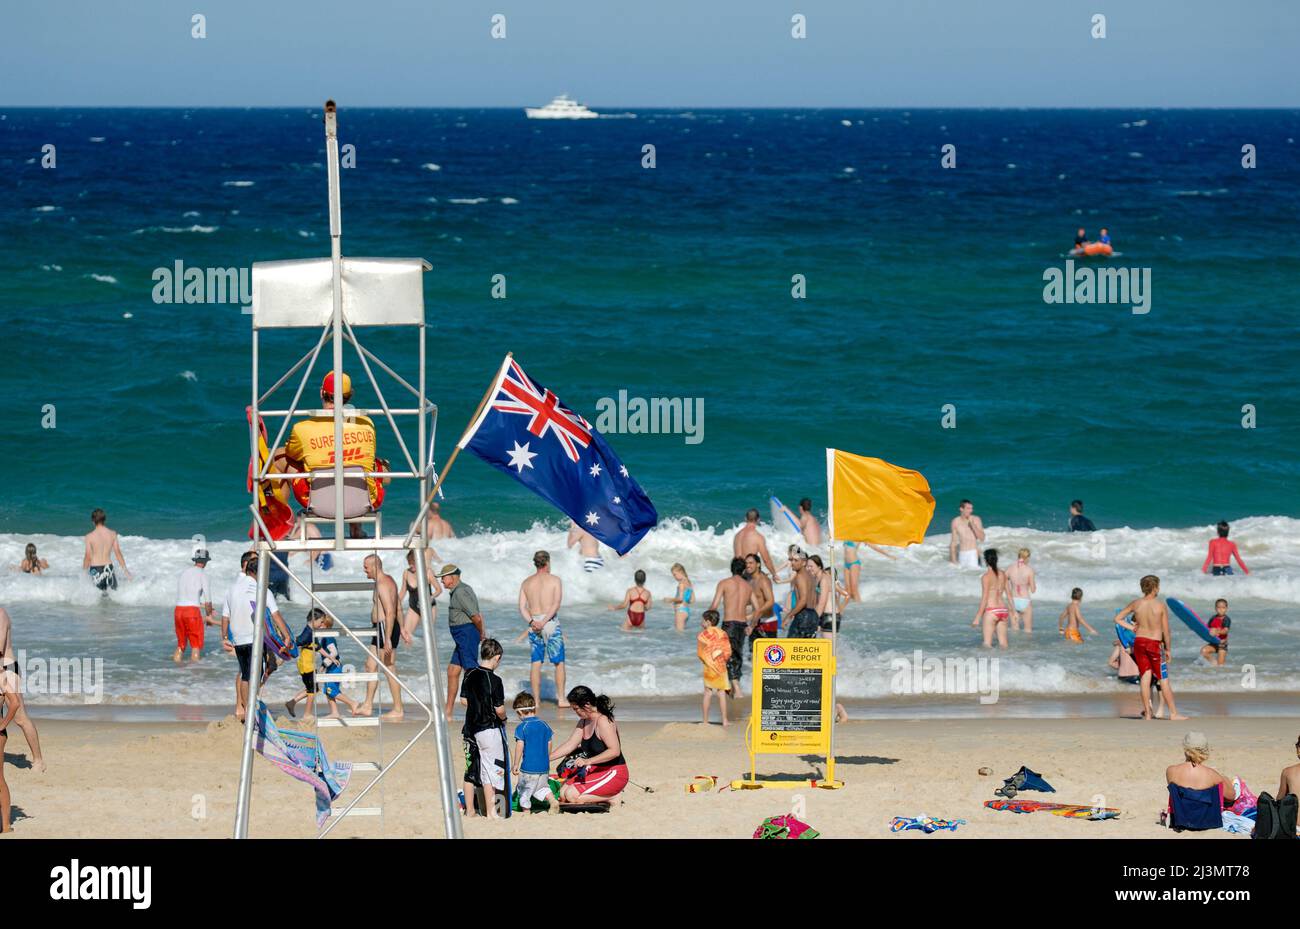 Surf lifesaver overseeing beach, watching for danger and people in distress. Stock Photo